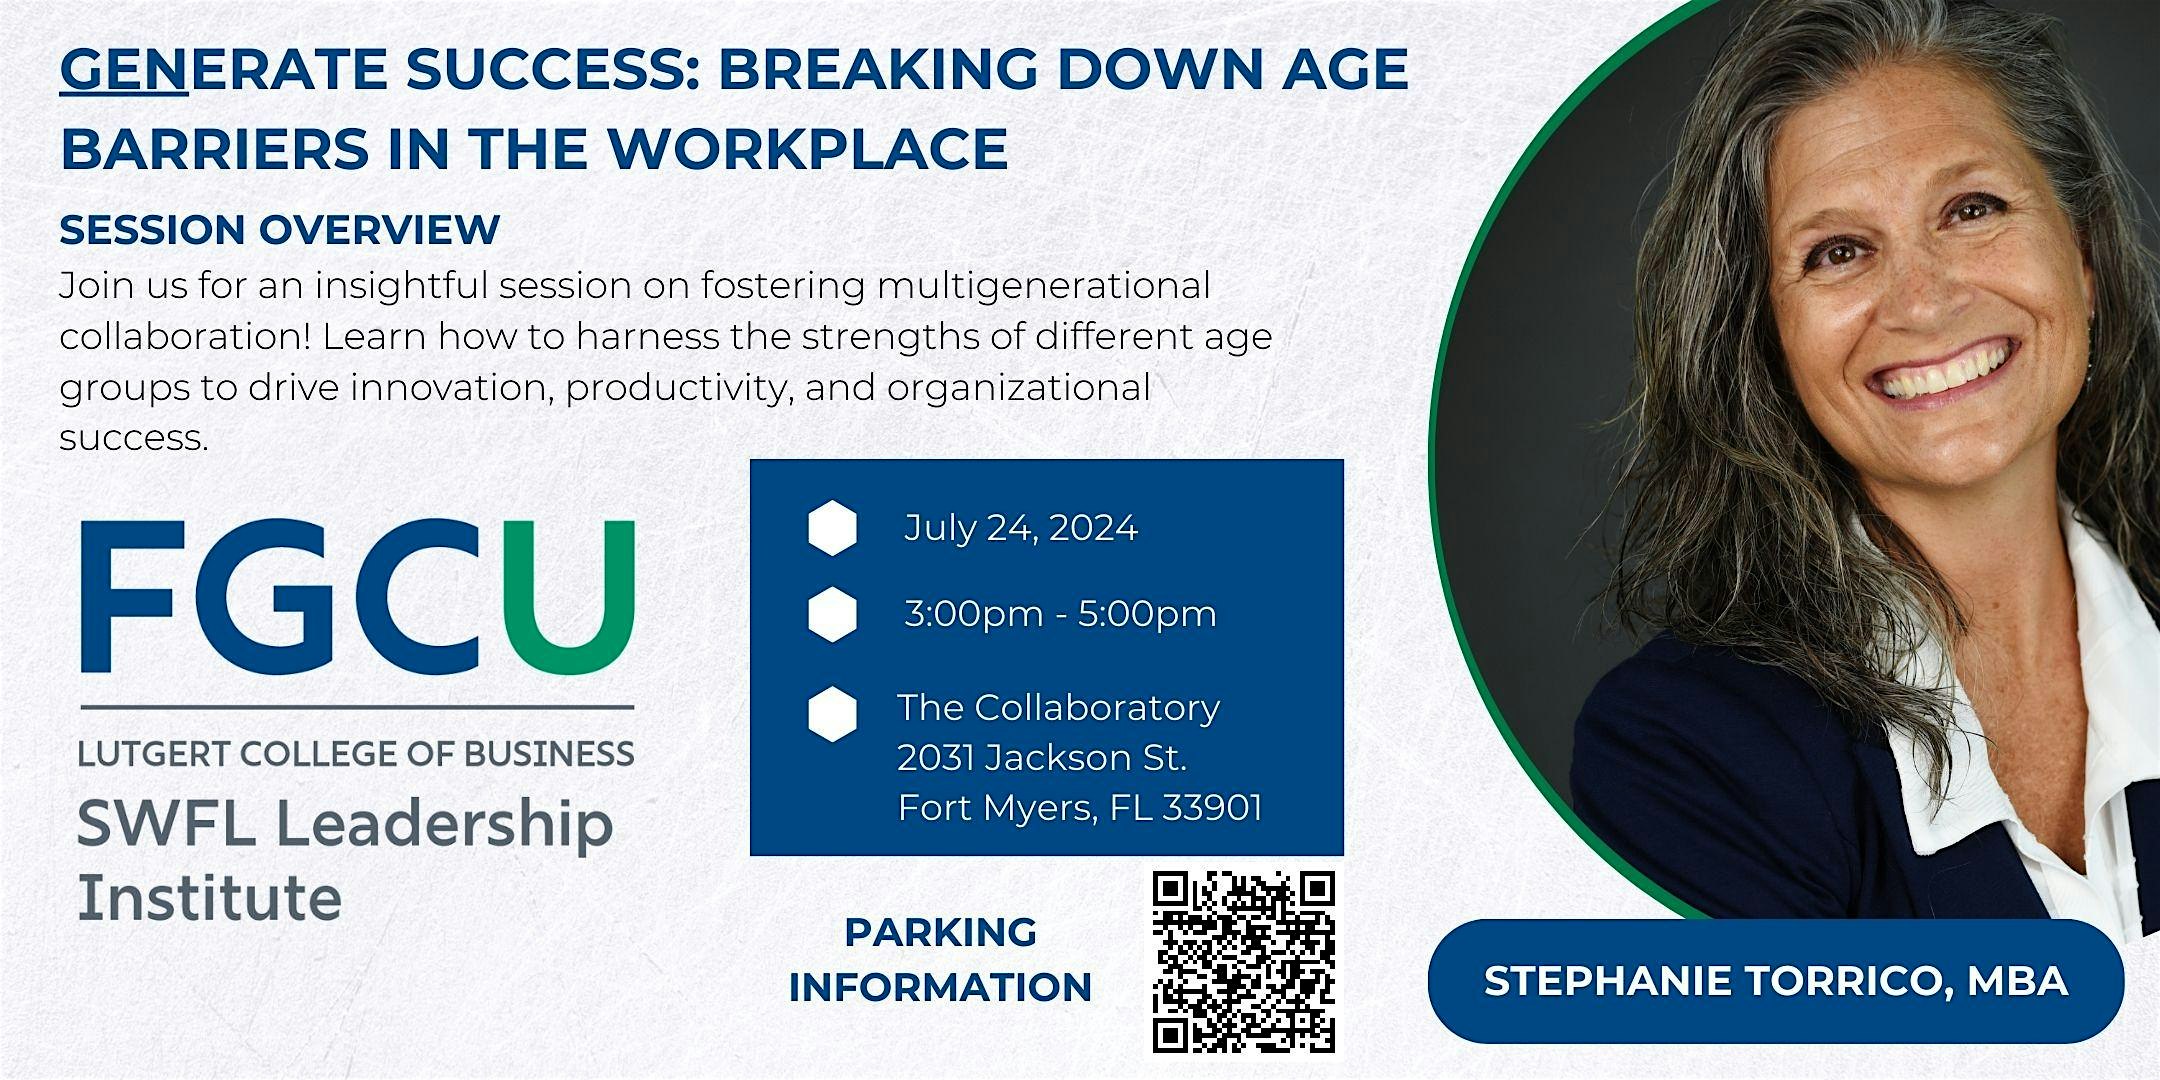 GENerate Success: Breaking Down Age Barriers in the Workplace